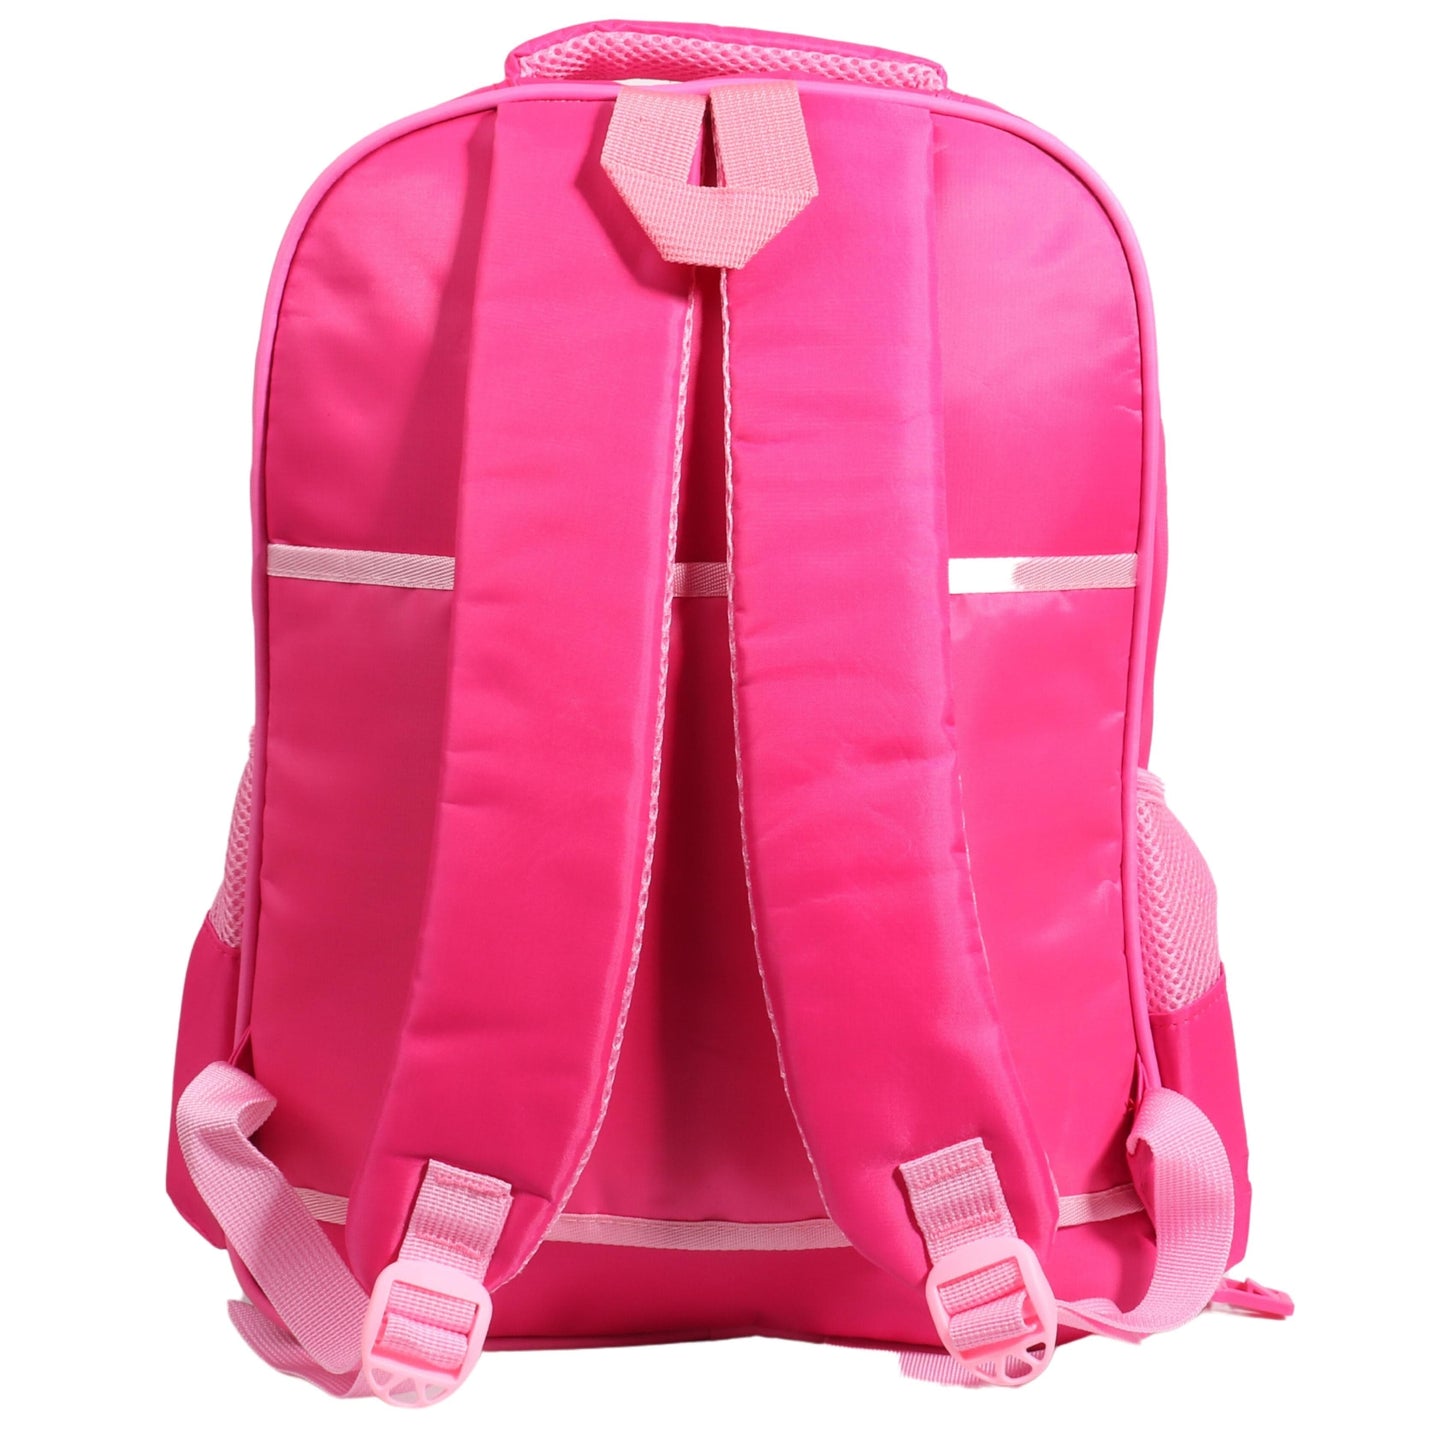 Beyond Marketplace School Bags Pink 3 in 1 School Bag Set with Pencil Case and Lunch Bag